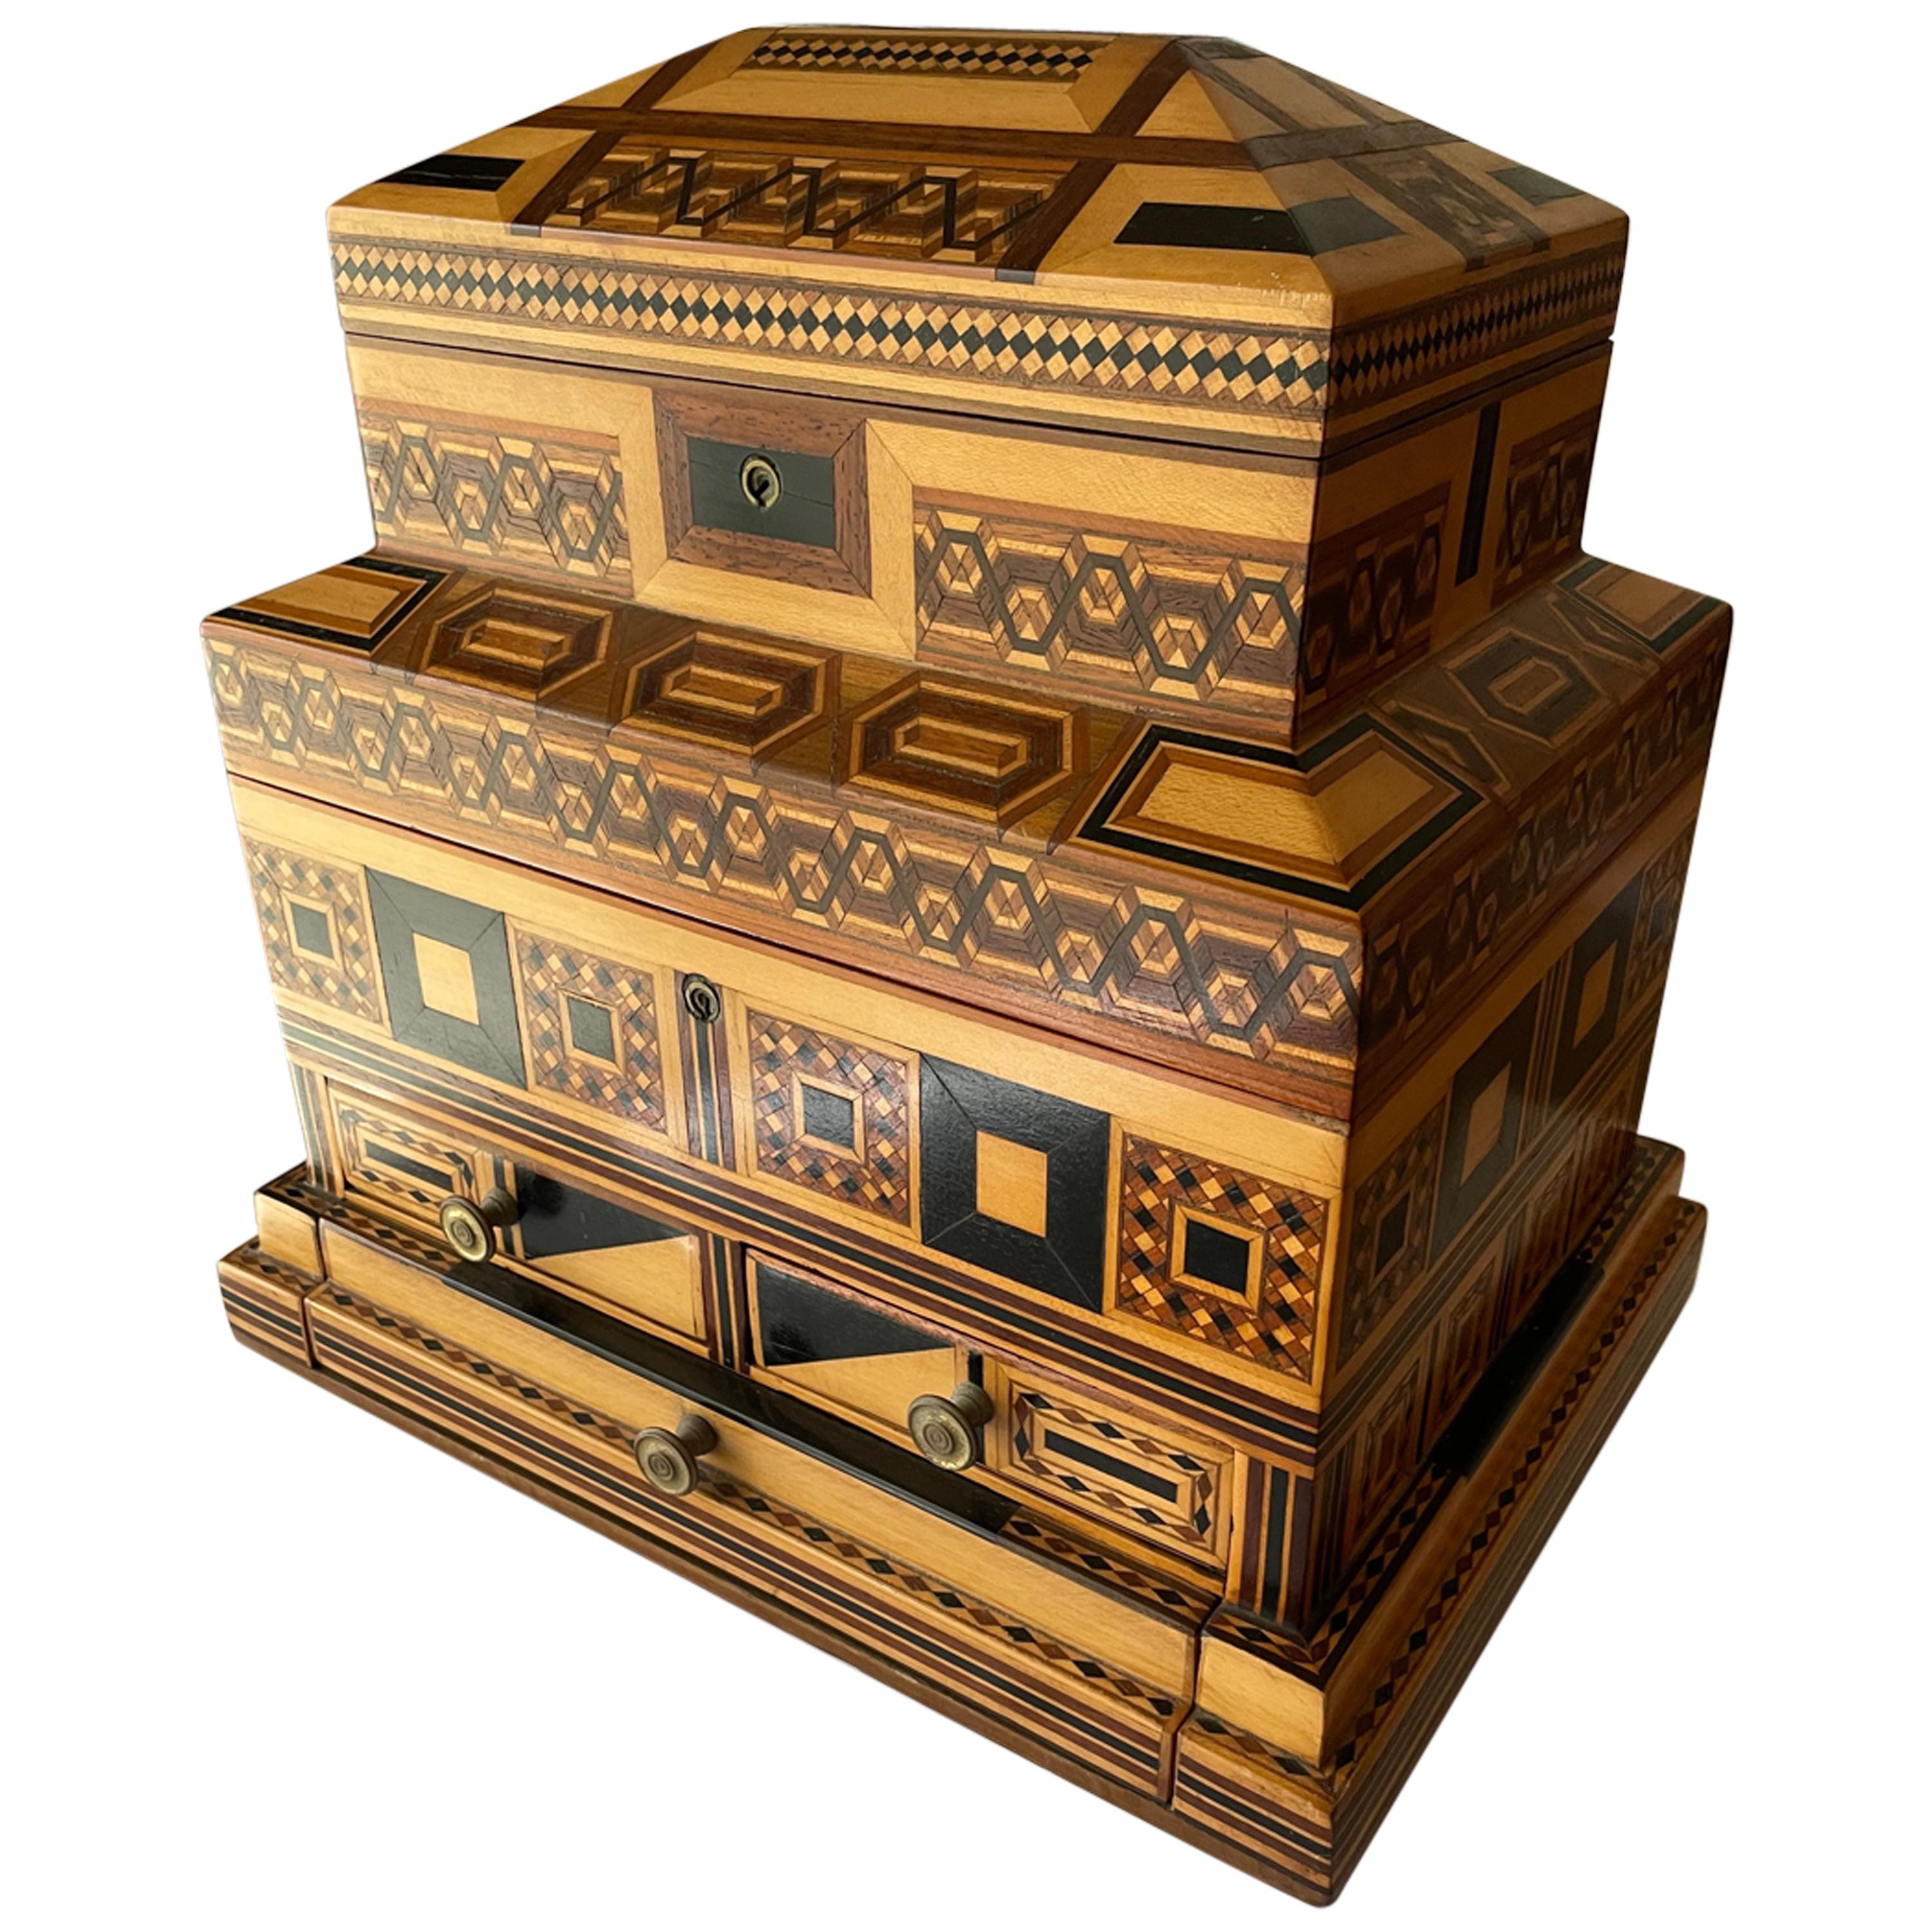 1900s Prisoner-Made Marquetry Inlay Wood Box in Masonic Temple Design